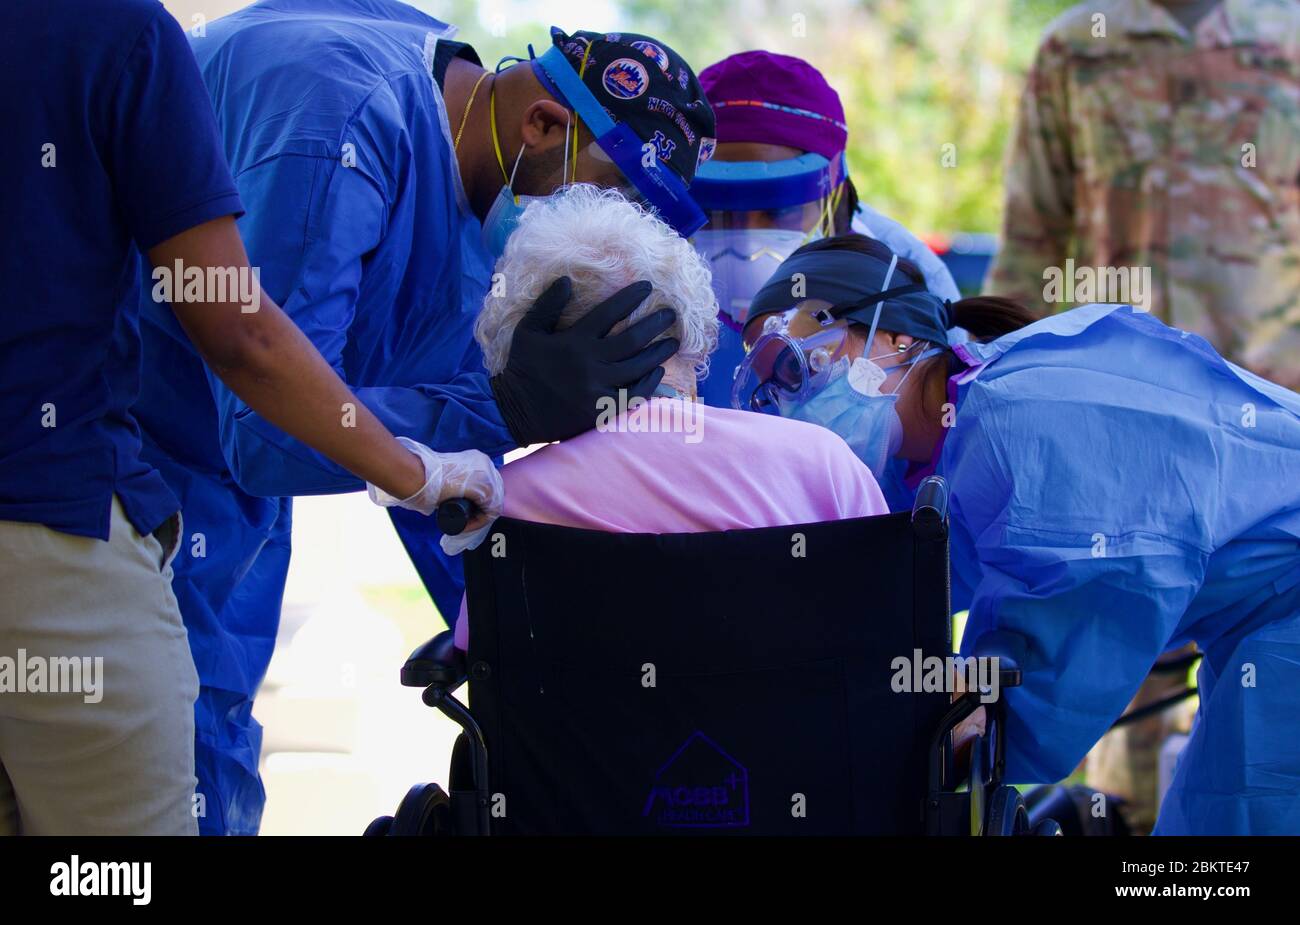 Registered nurses with the Florida Department of Health perform a COVID-19, coronavirus specimen collection on a patient at a Northeast Florida nursing home May 1, 2020 in St. Augustine, Florida. Stock Photo